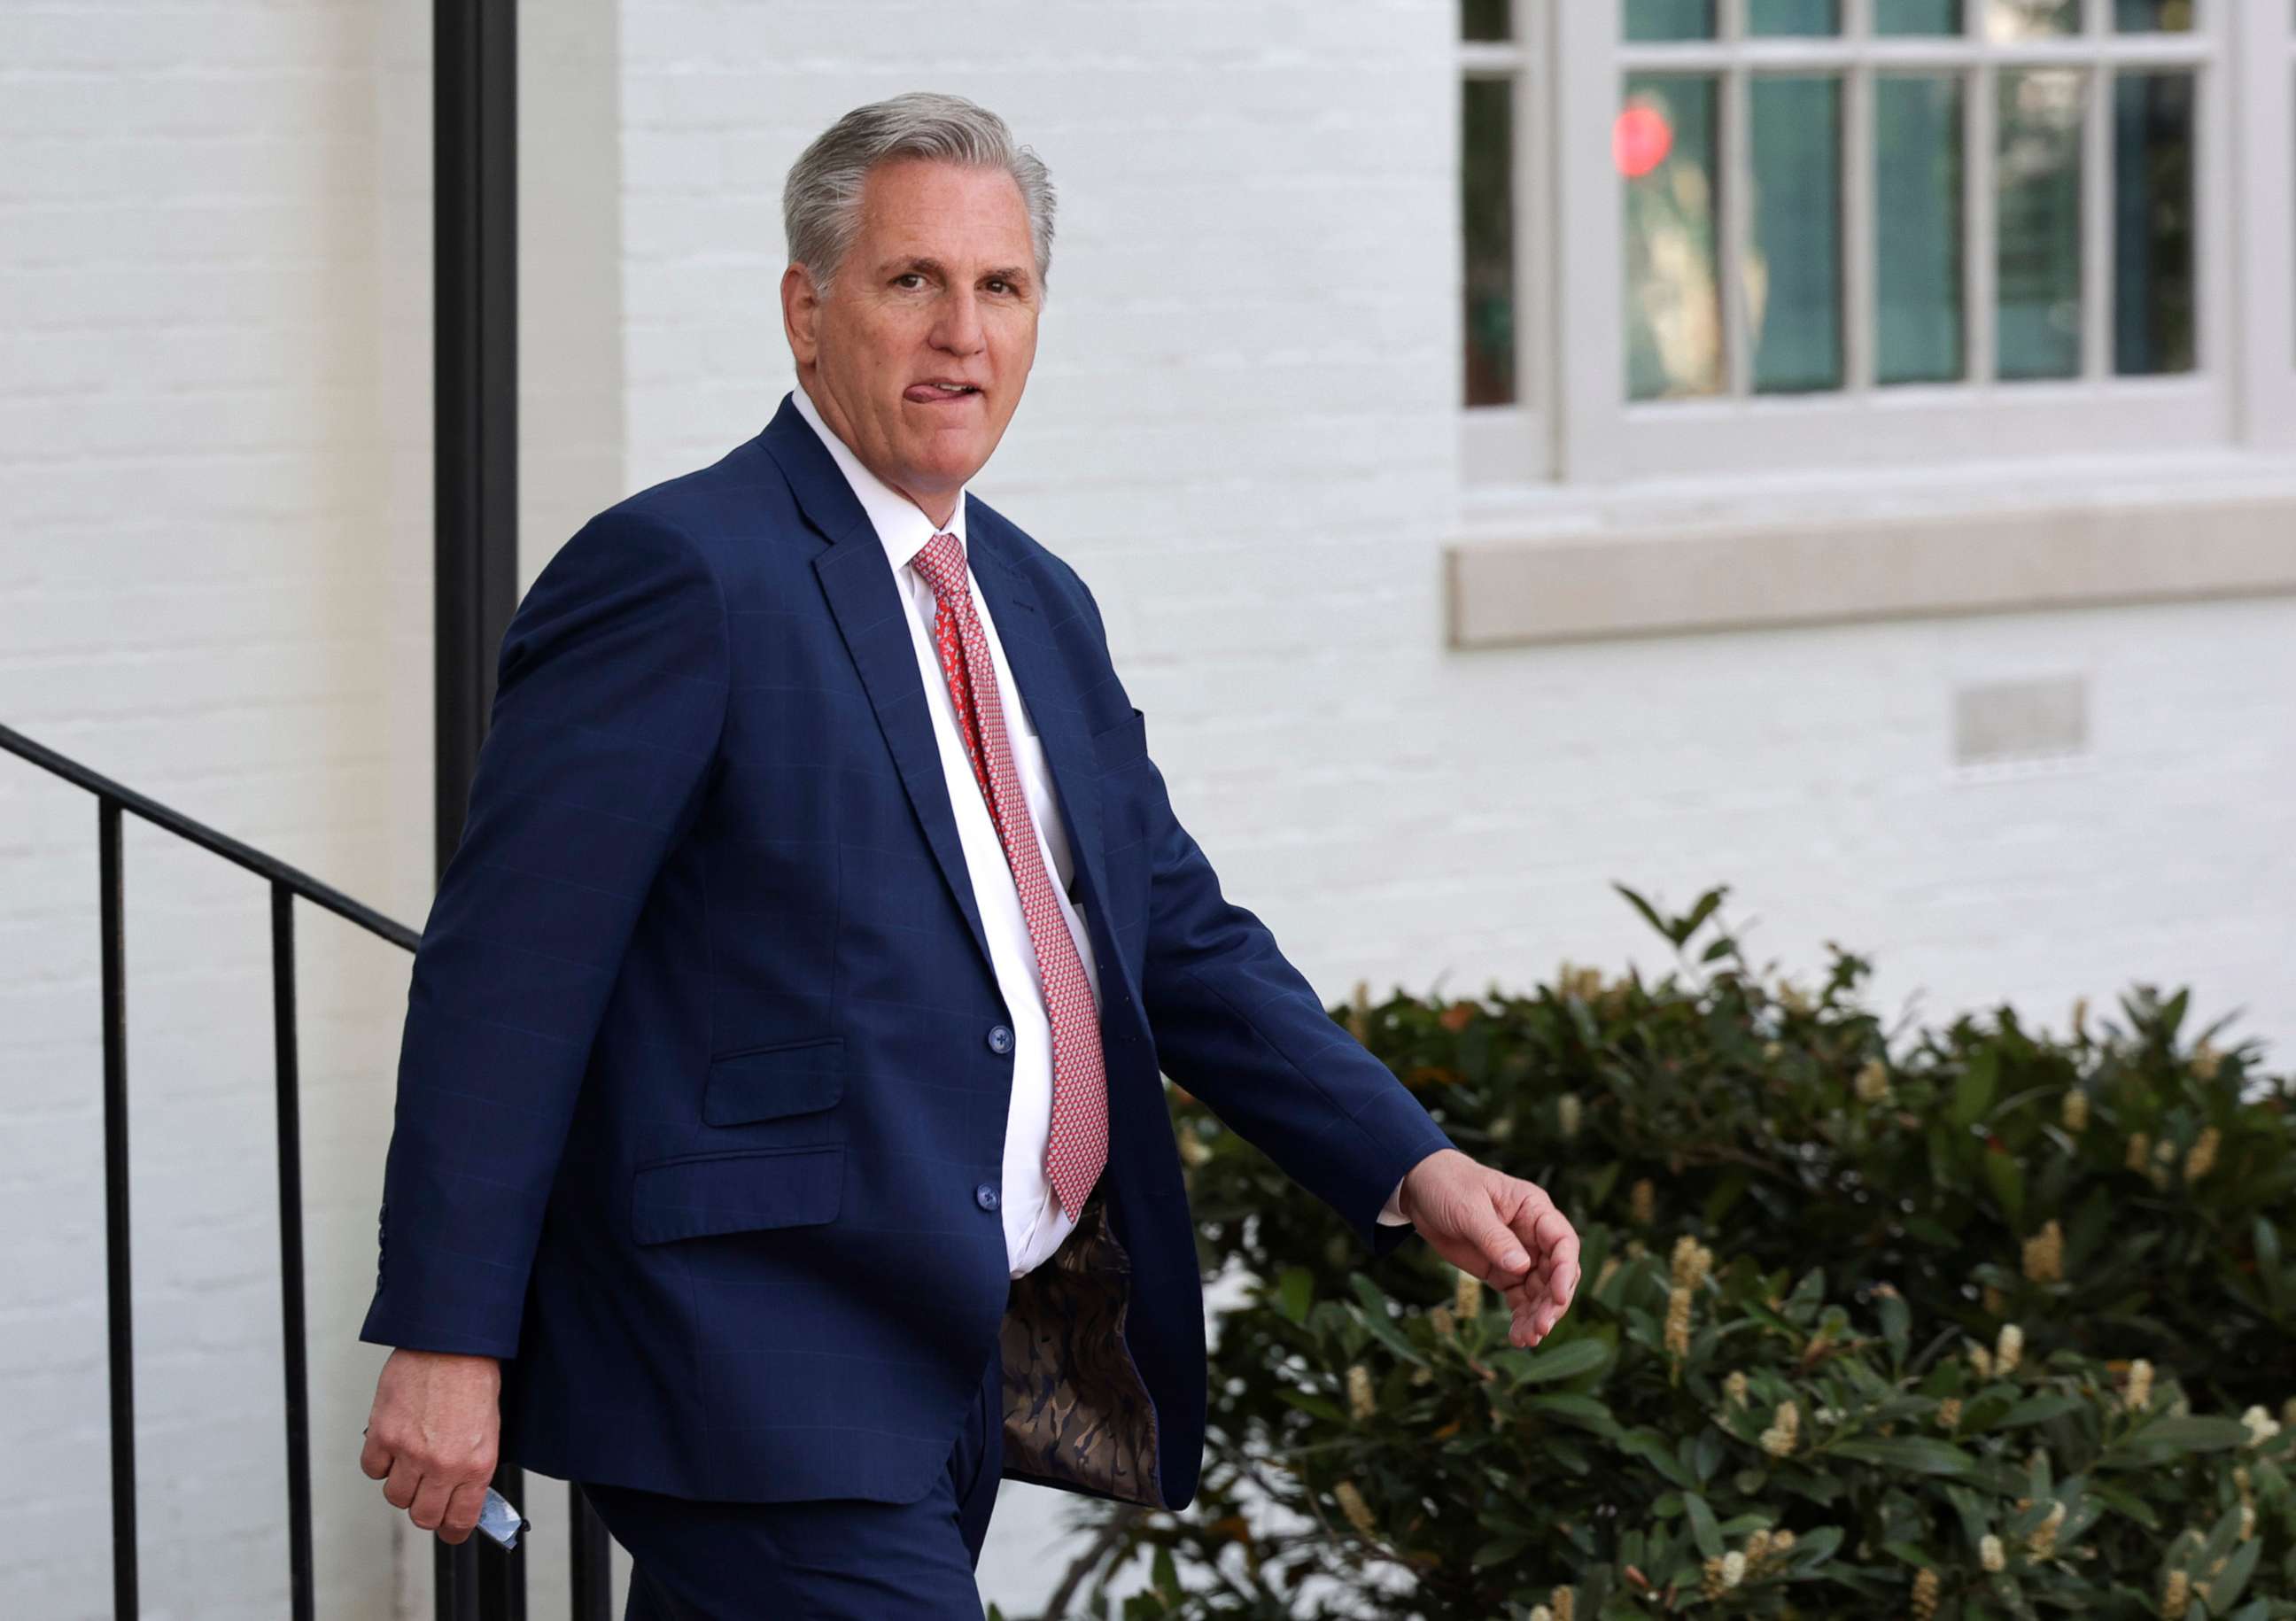 PHOTO: House Minority Leader Kevin McCarthy leaves a House Republican conference meeting  on Capitol Hill, April 27, 2022, in Washington, D.C.